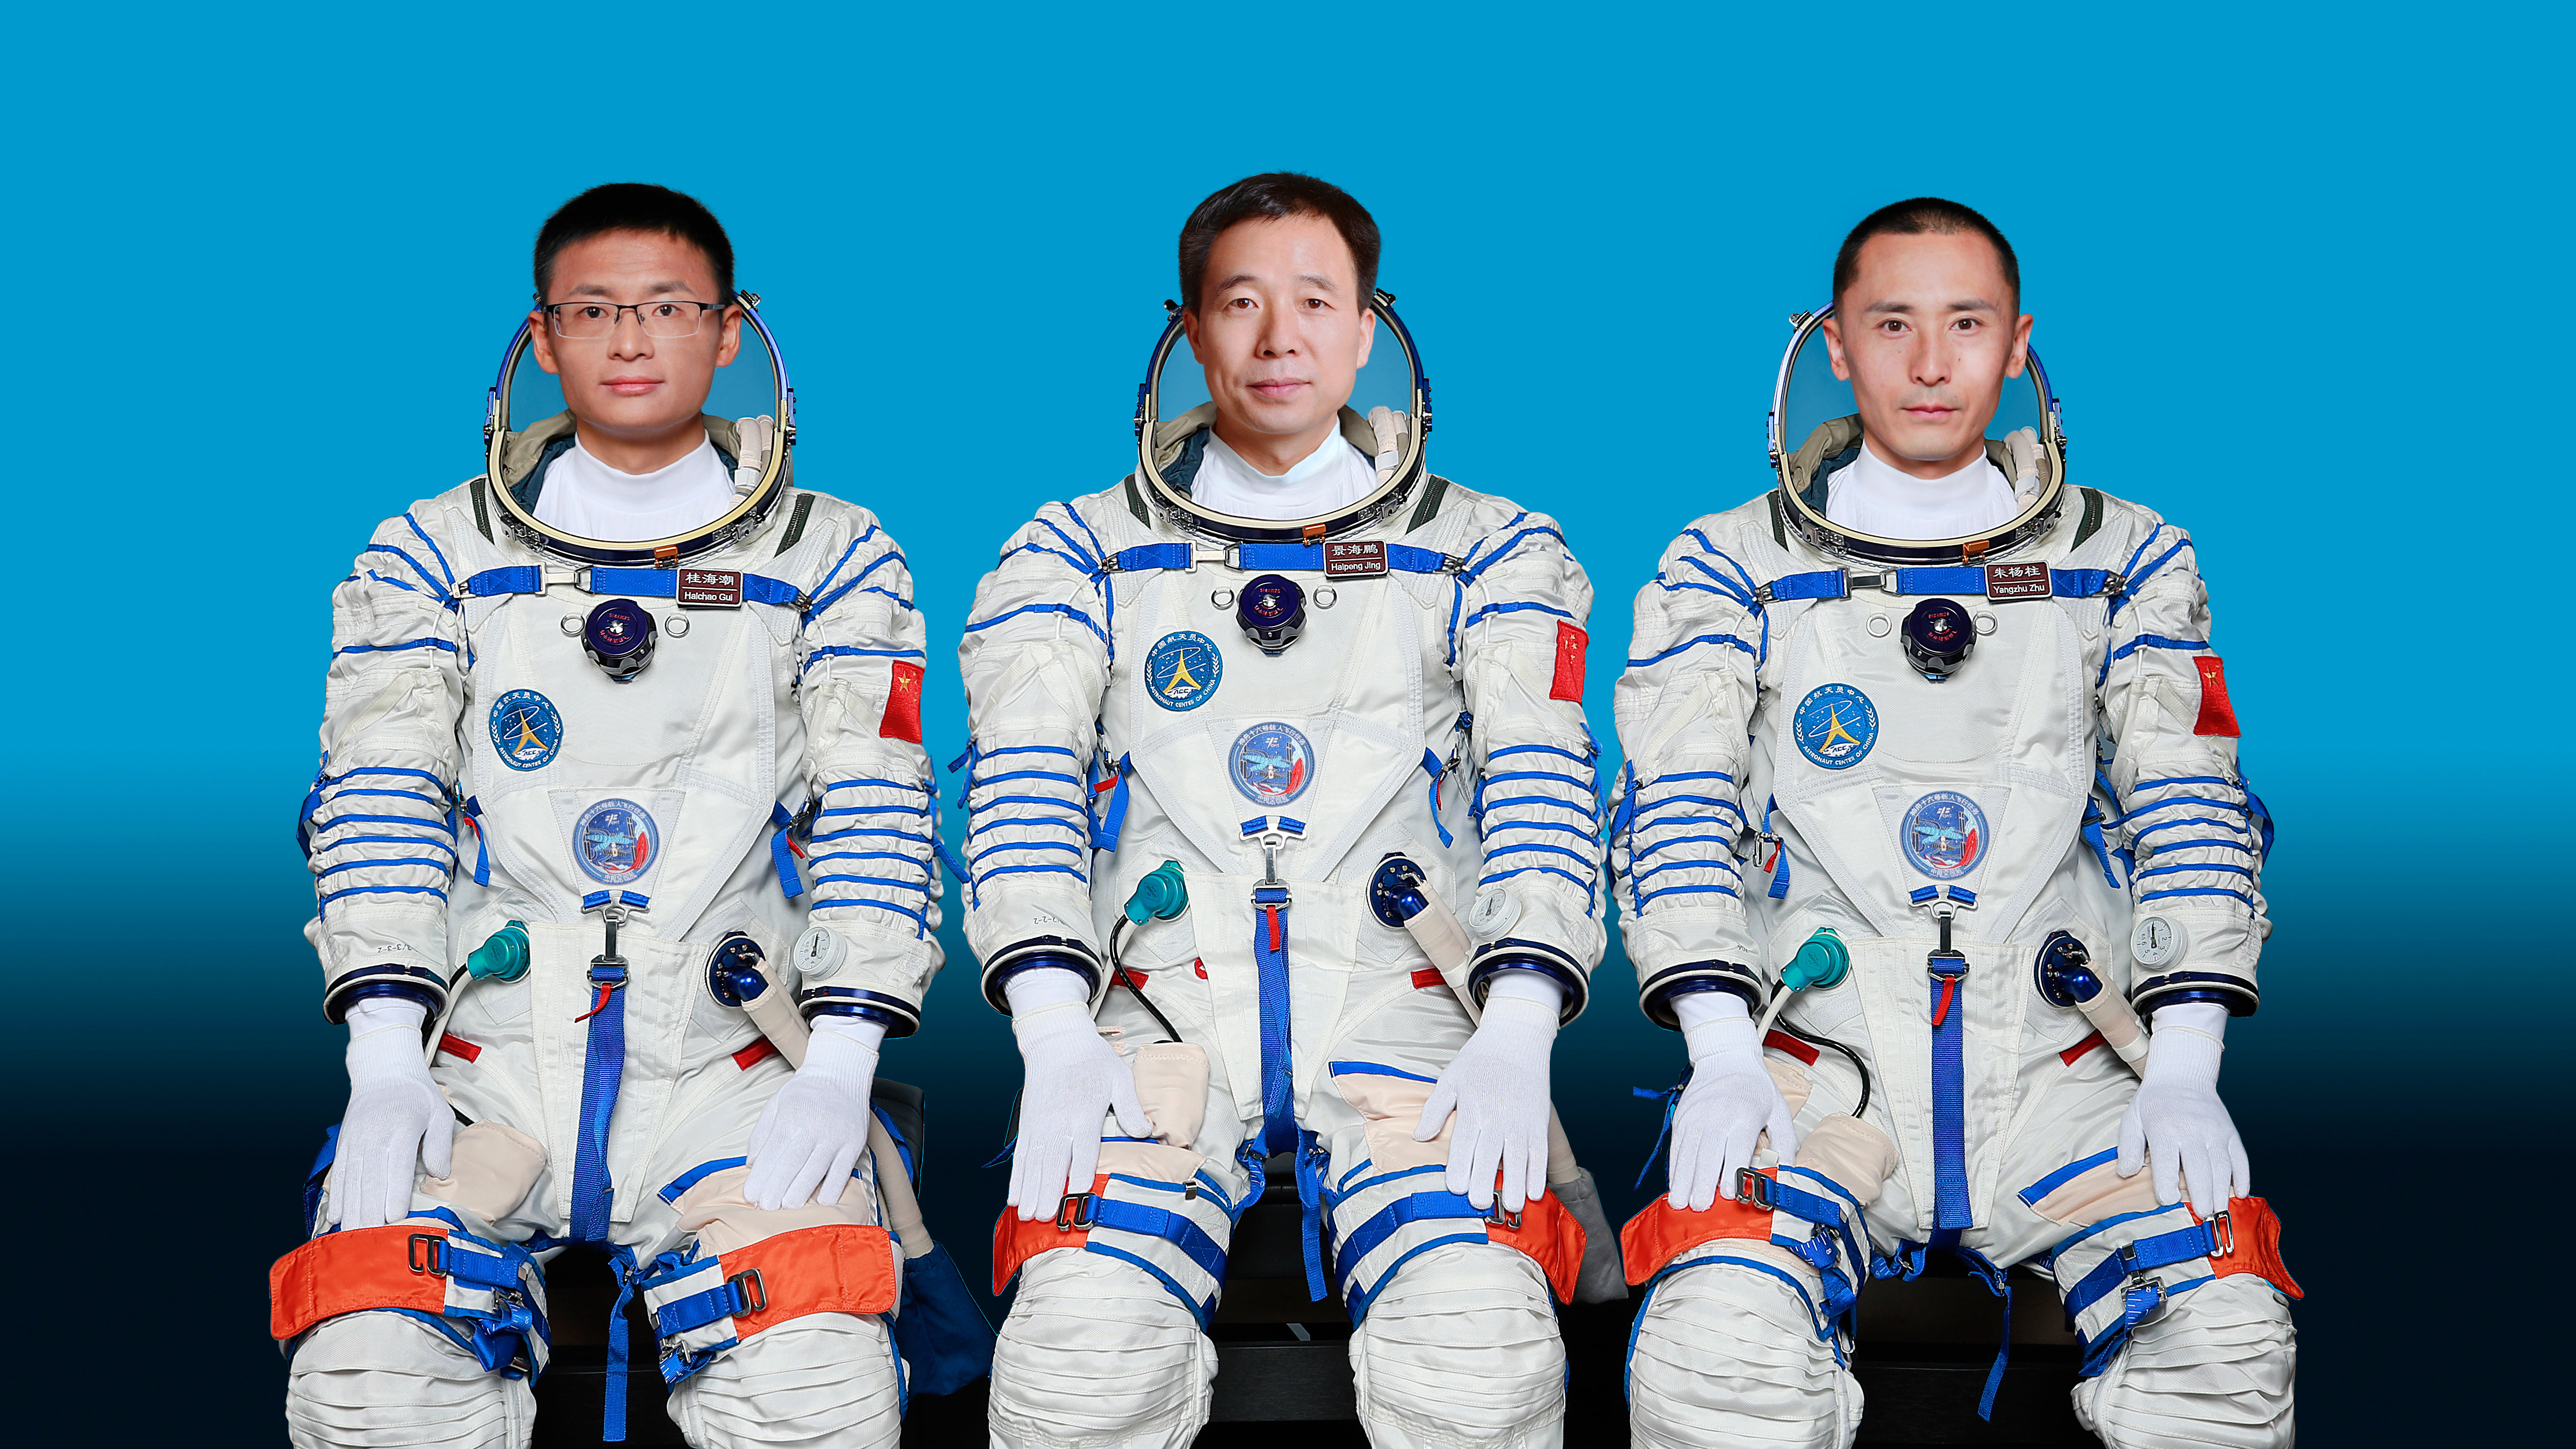 Taikonauts Jing Haipeng (C), Zhu Yangzhu (R) and Gui Haichao will carry out the Shenzhou-16 spaceflight mission to the China Space Station on May 30, 2023. /CMSA